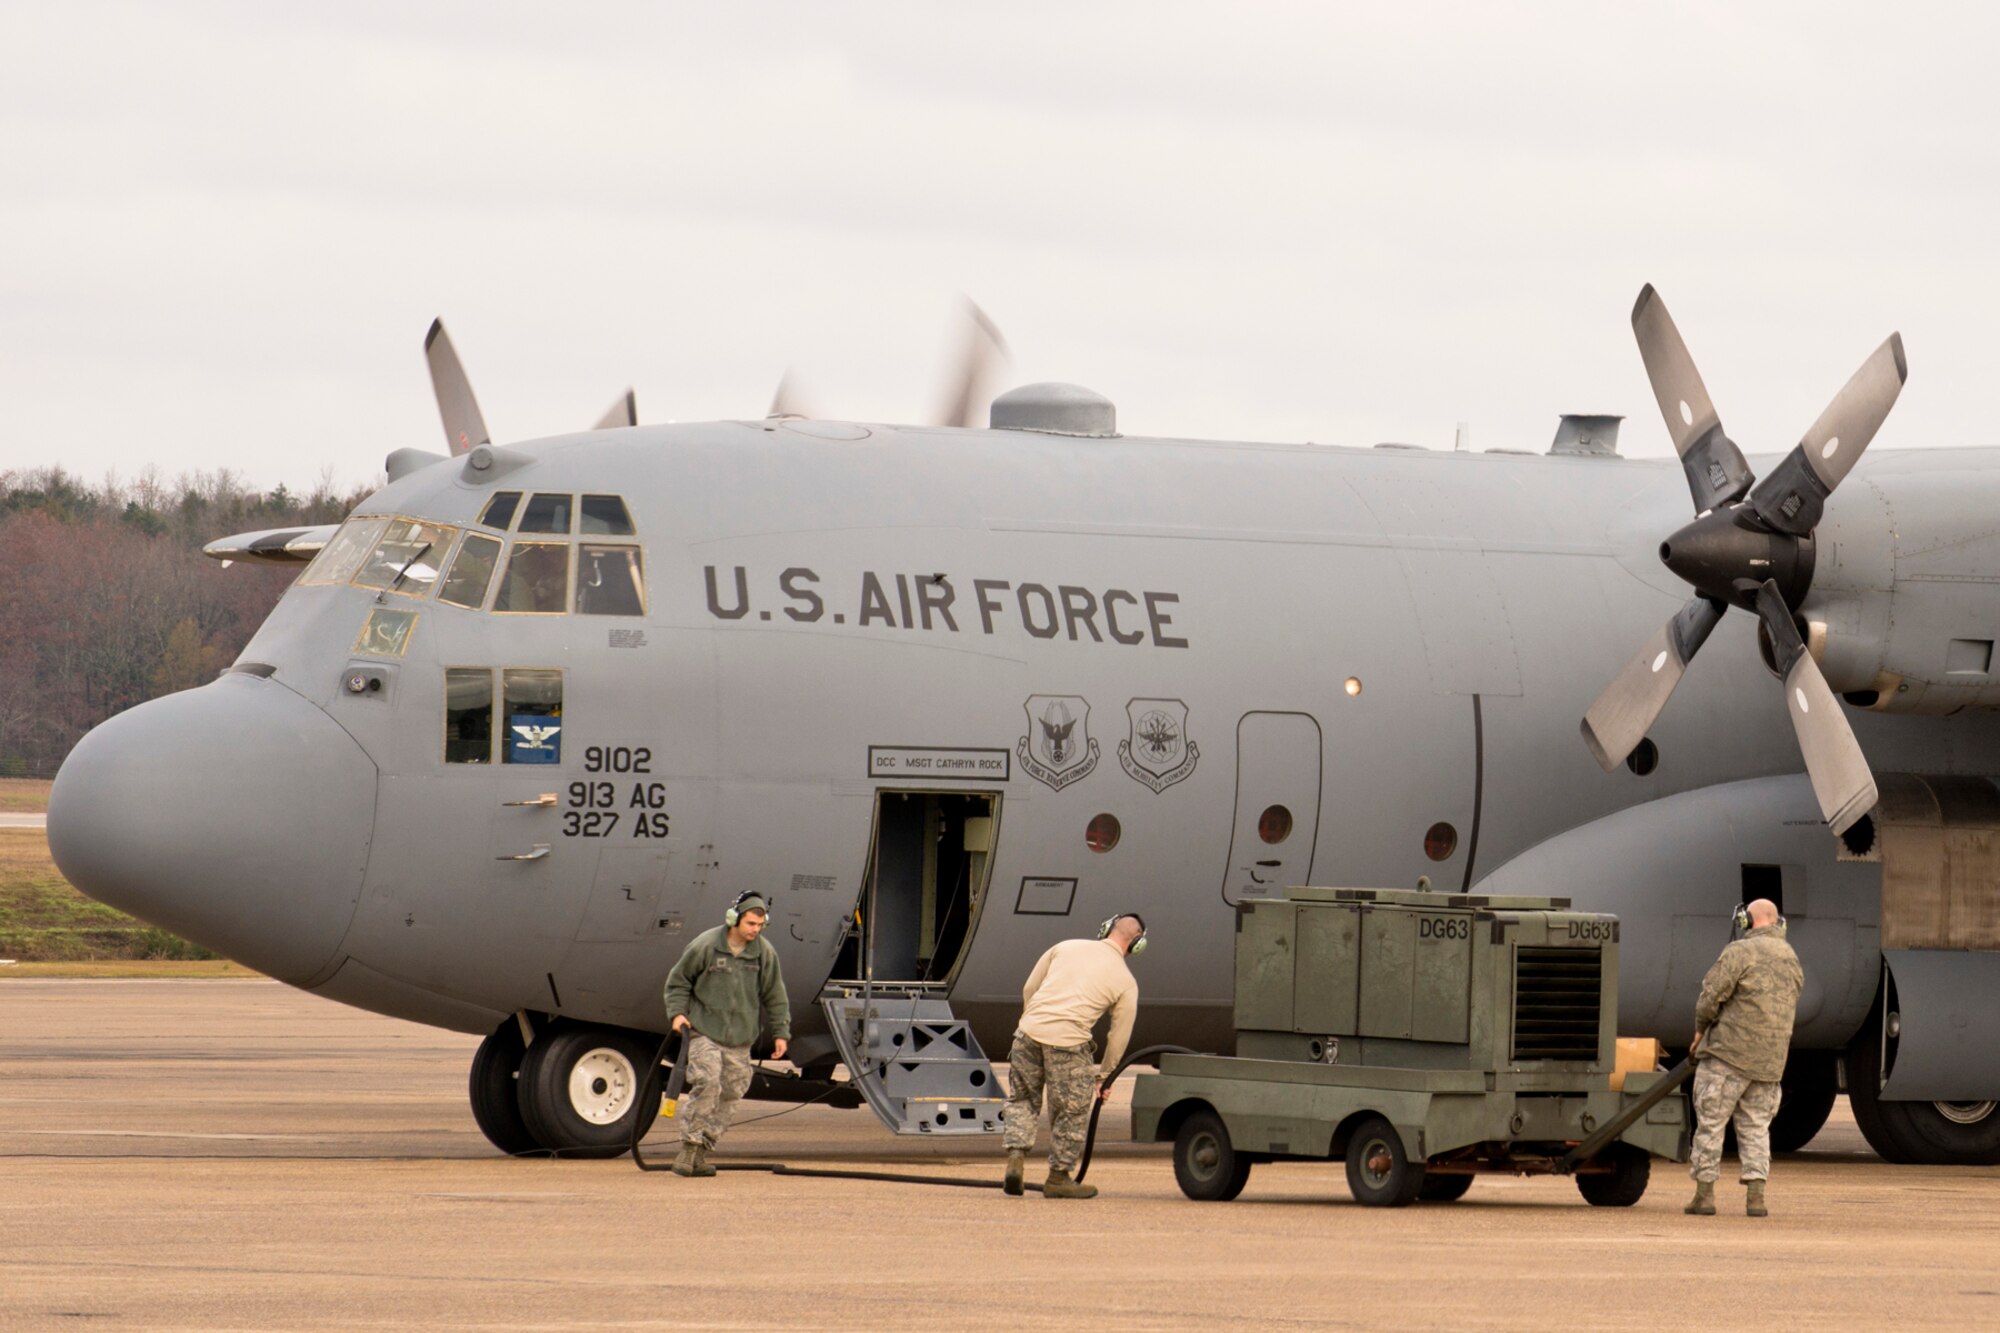 (From Left) U.S. Air Force Tech Sgts. Timothy Hammonds, David Chismark and Master Sgt. Steven Lessard, remove an external power cart from a C-130H Hercules at Little Rock Air Force Base, Ark., Dec. 1, 2015. All three Airmen are crew chiefs assigned to the 913th Maintenance Squadron, and always ensure their planes are ready for world-wide missions. (U.S. Air Force photo by Master Sgt. Jeff Walston/Released) 